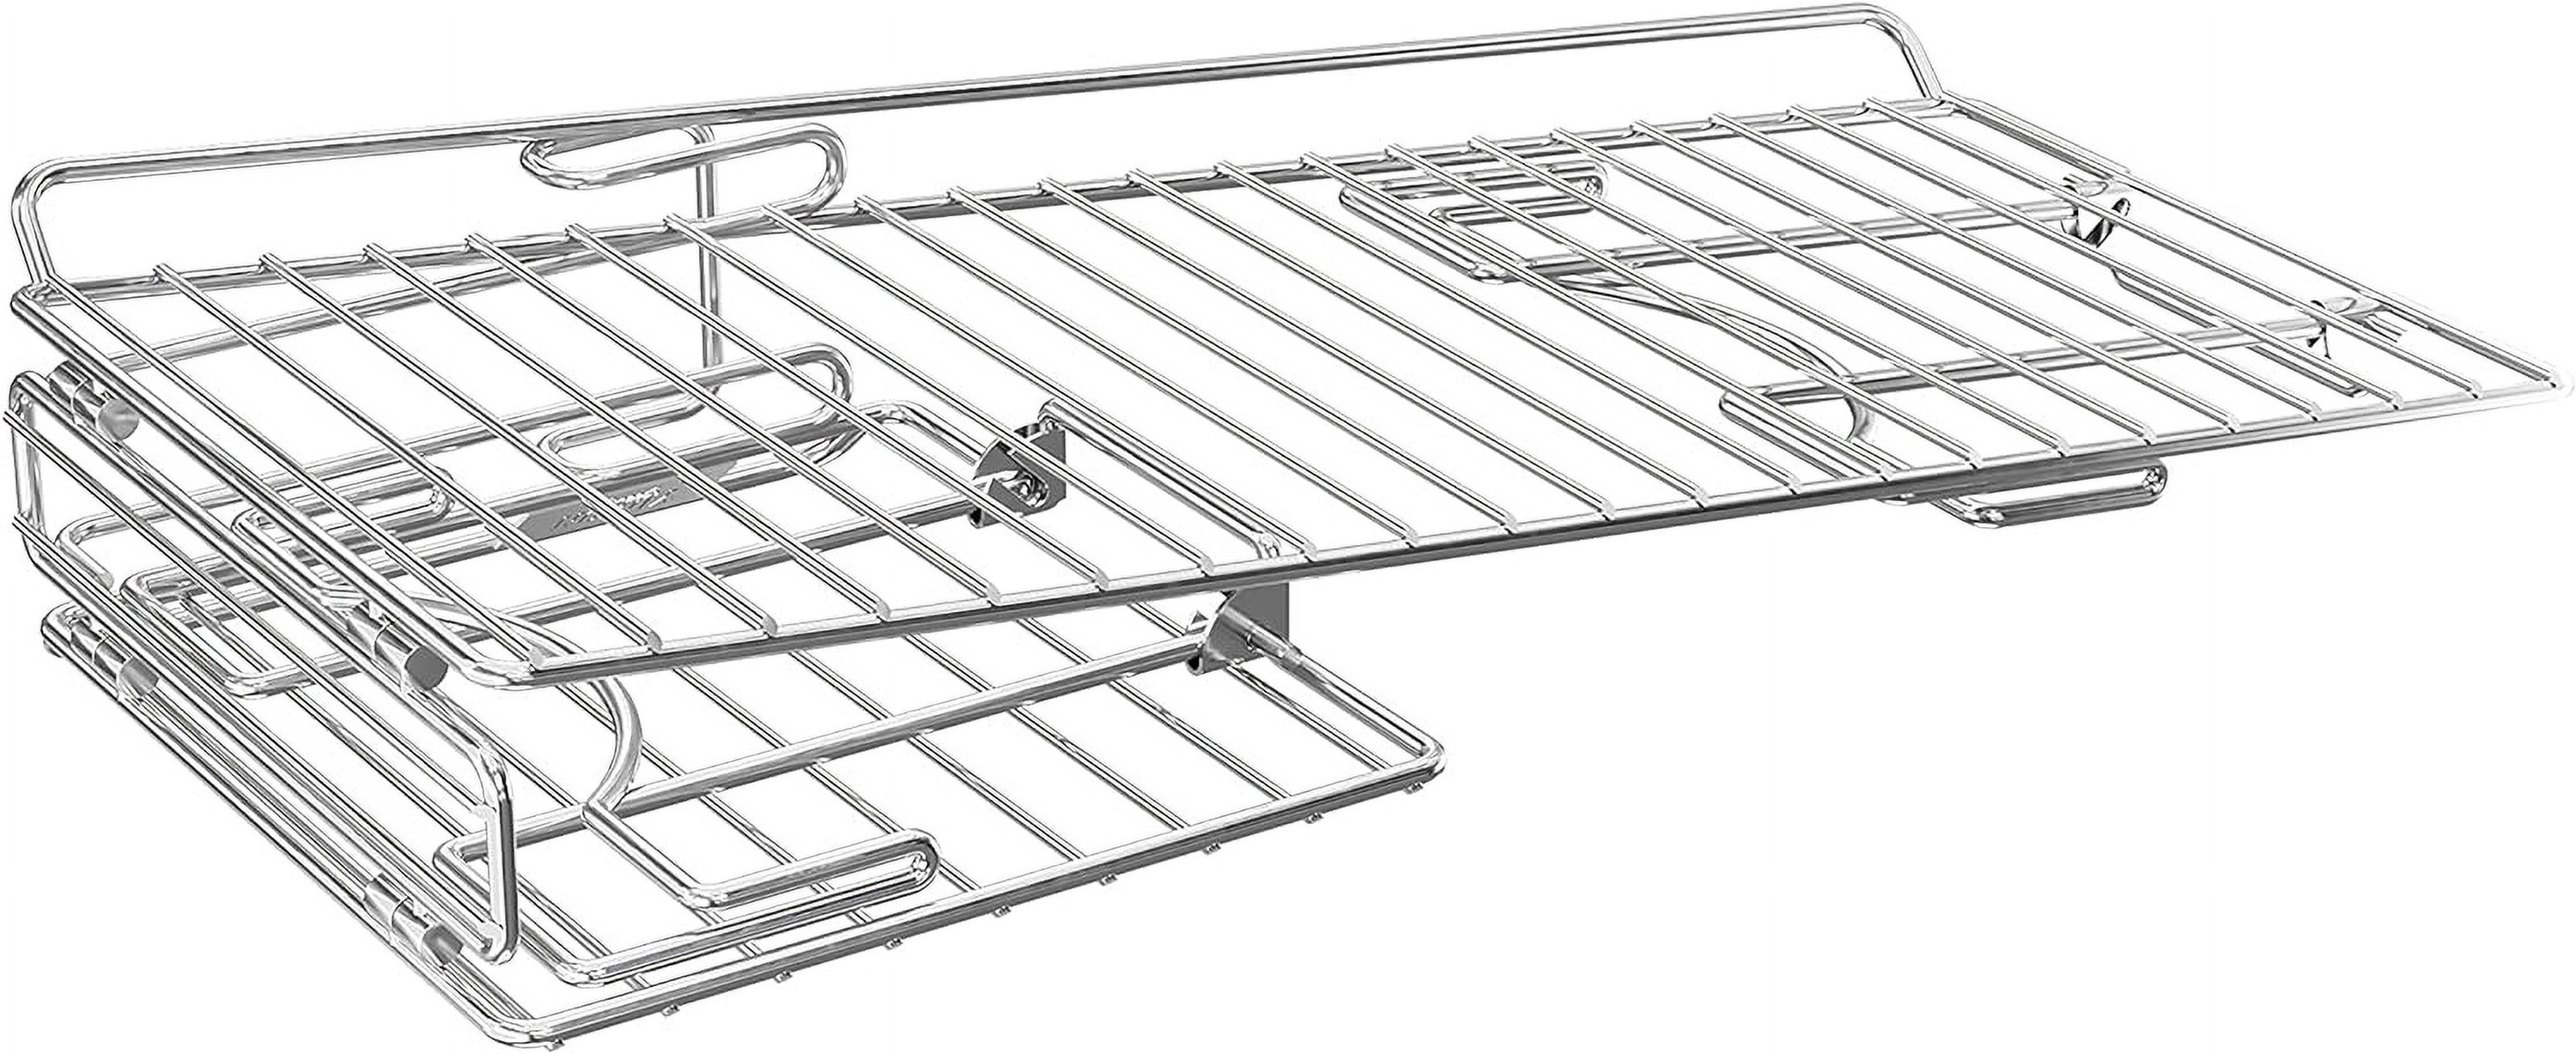 Yukon Glory Collapsible BBQ Grill Rack Griddle Warming Tray for 22